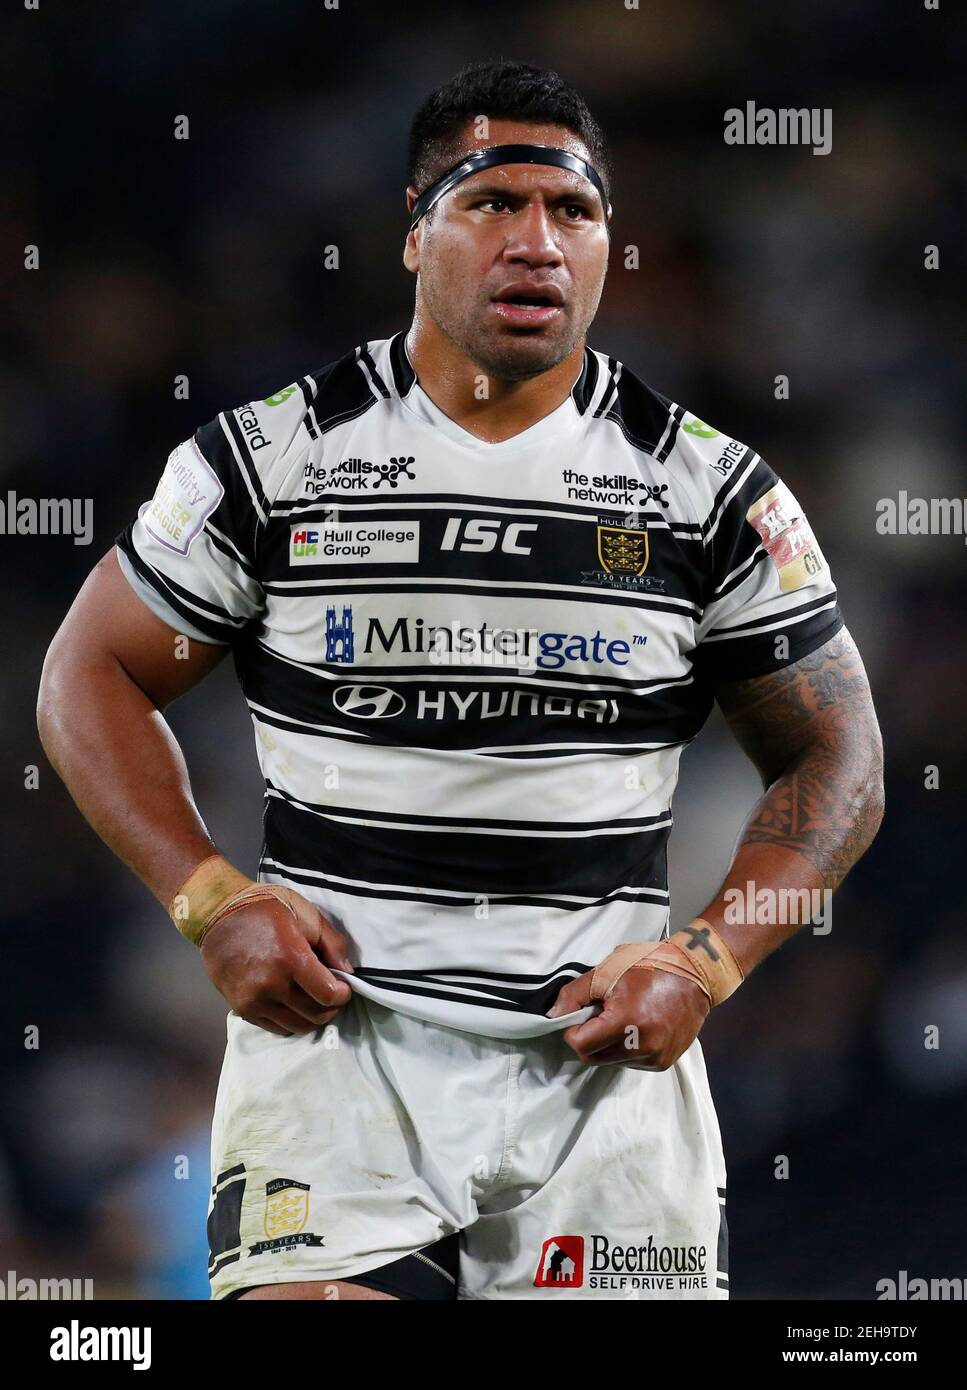 Rugby League - Hull FC v Wigan Warriors - First Utility Super League - The Kingston Communications Stadium - 23/7/15 Mickey Paea - Hull FC  Mandatory Credit: Action Images / Ed Sykes  EDITORIAL USE ONLY. Stock Photo